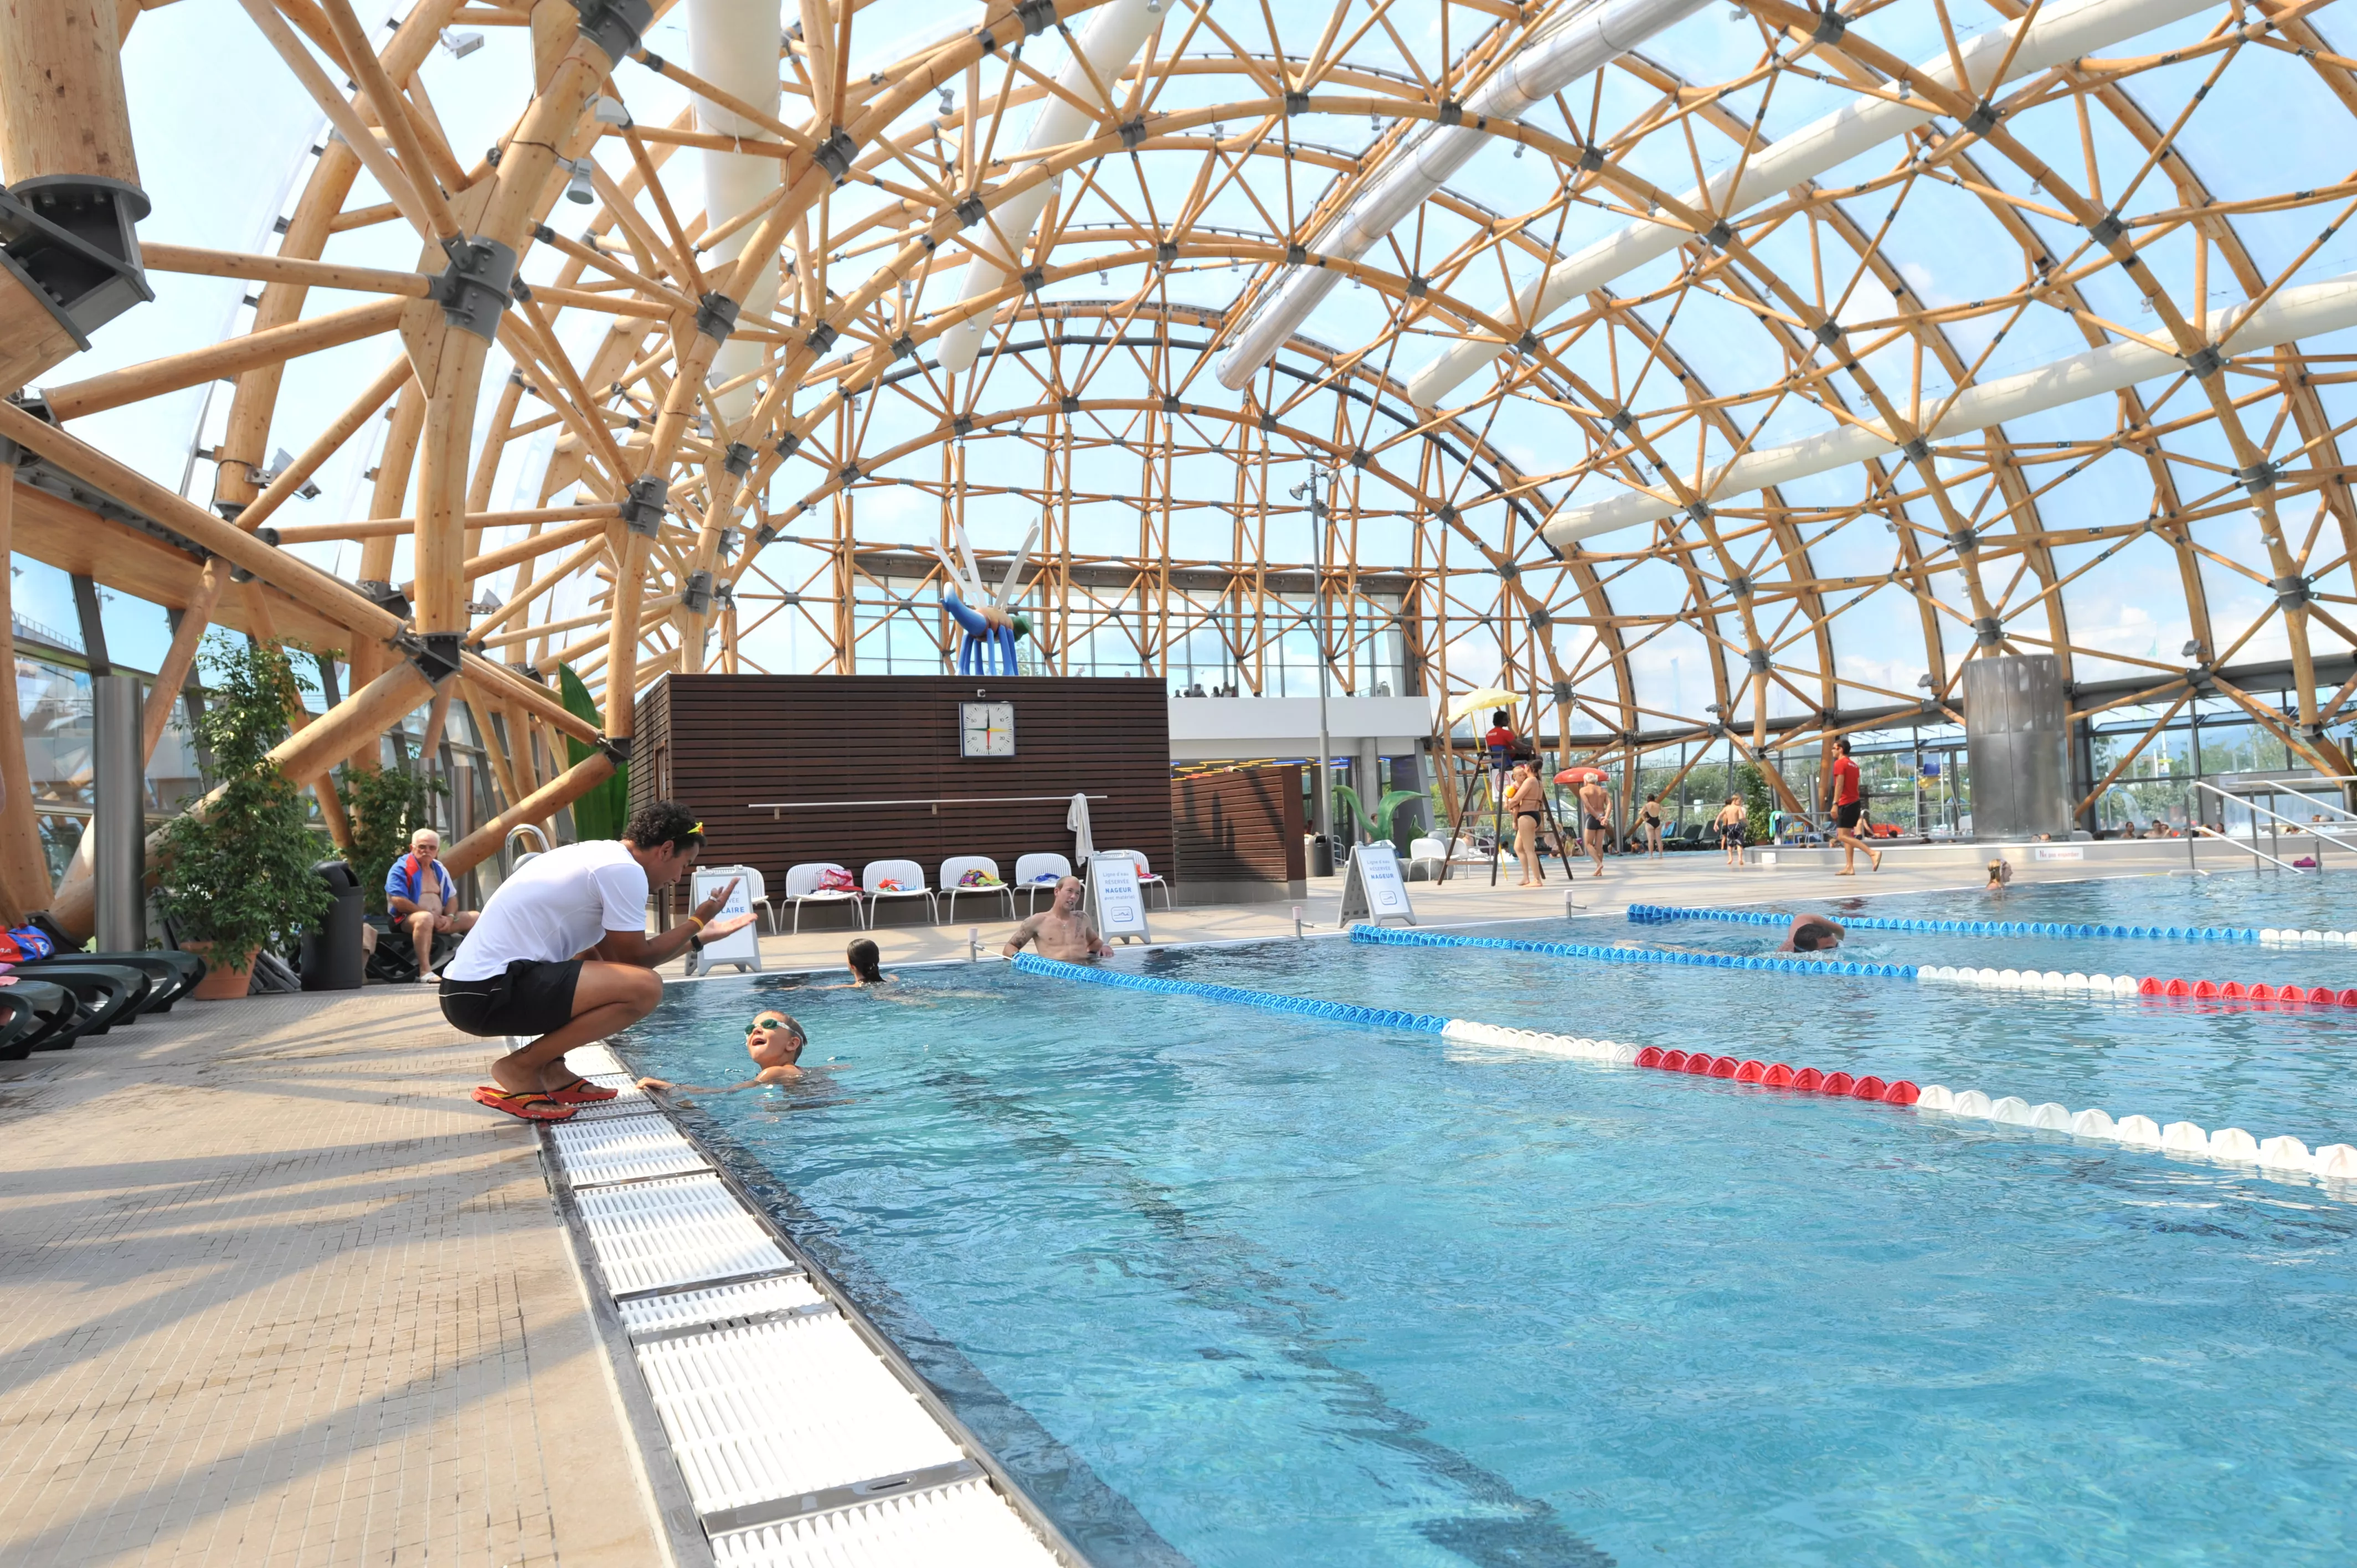 Espace Aquatique in France, Europe | Swimming - Rated 0.7